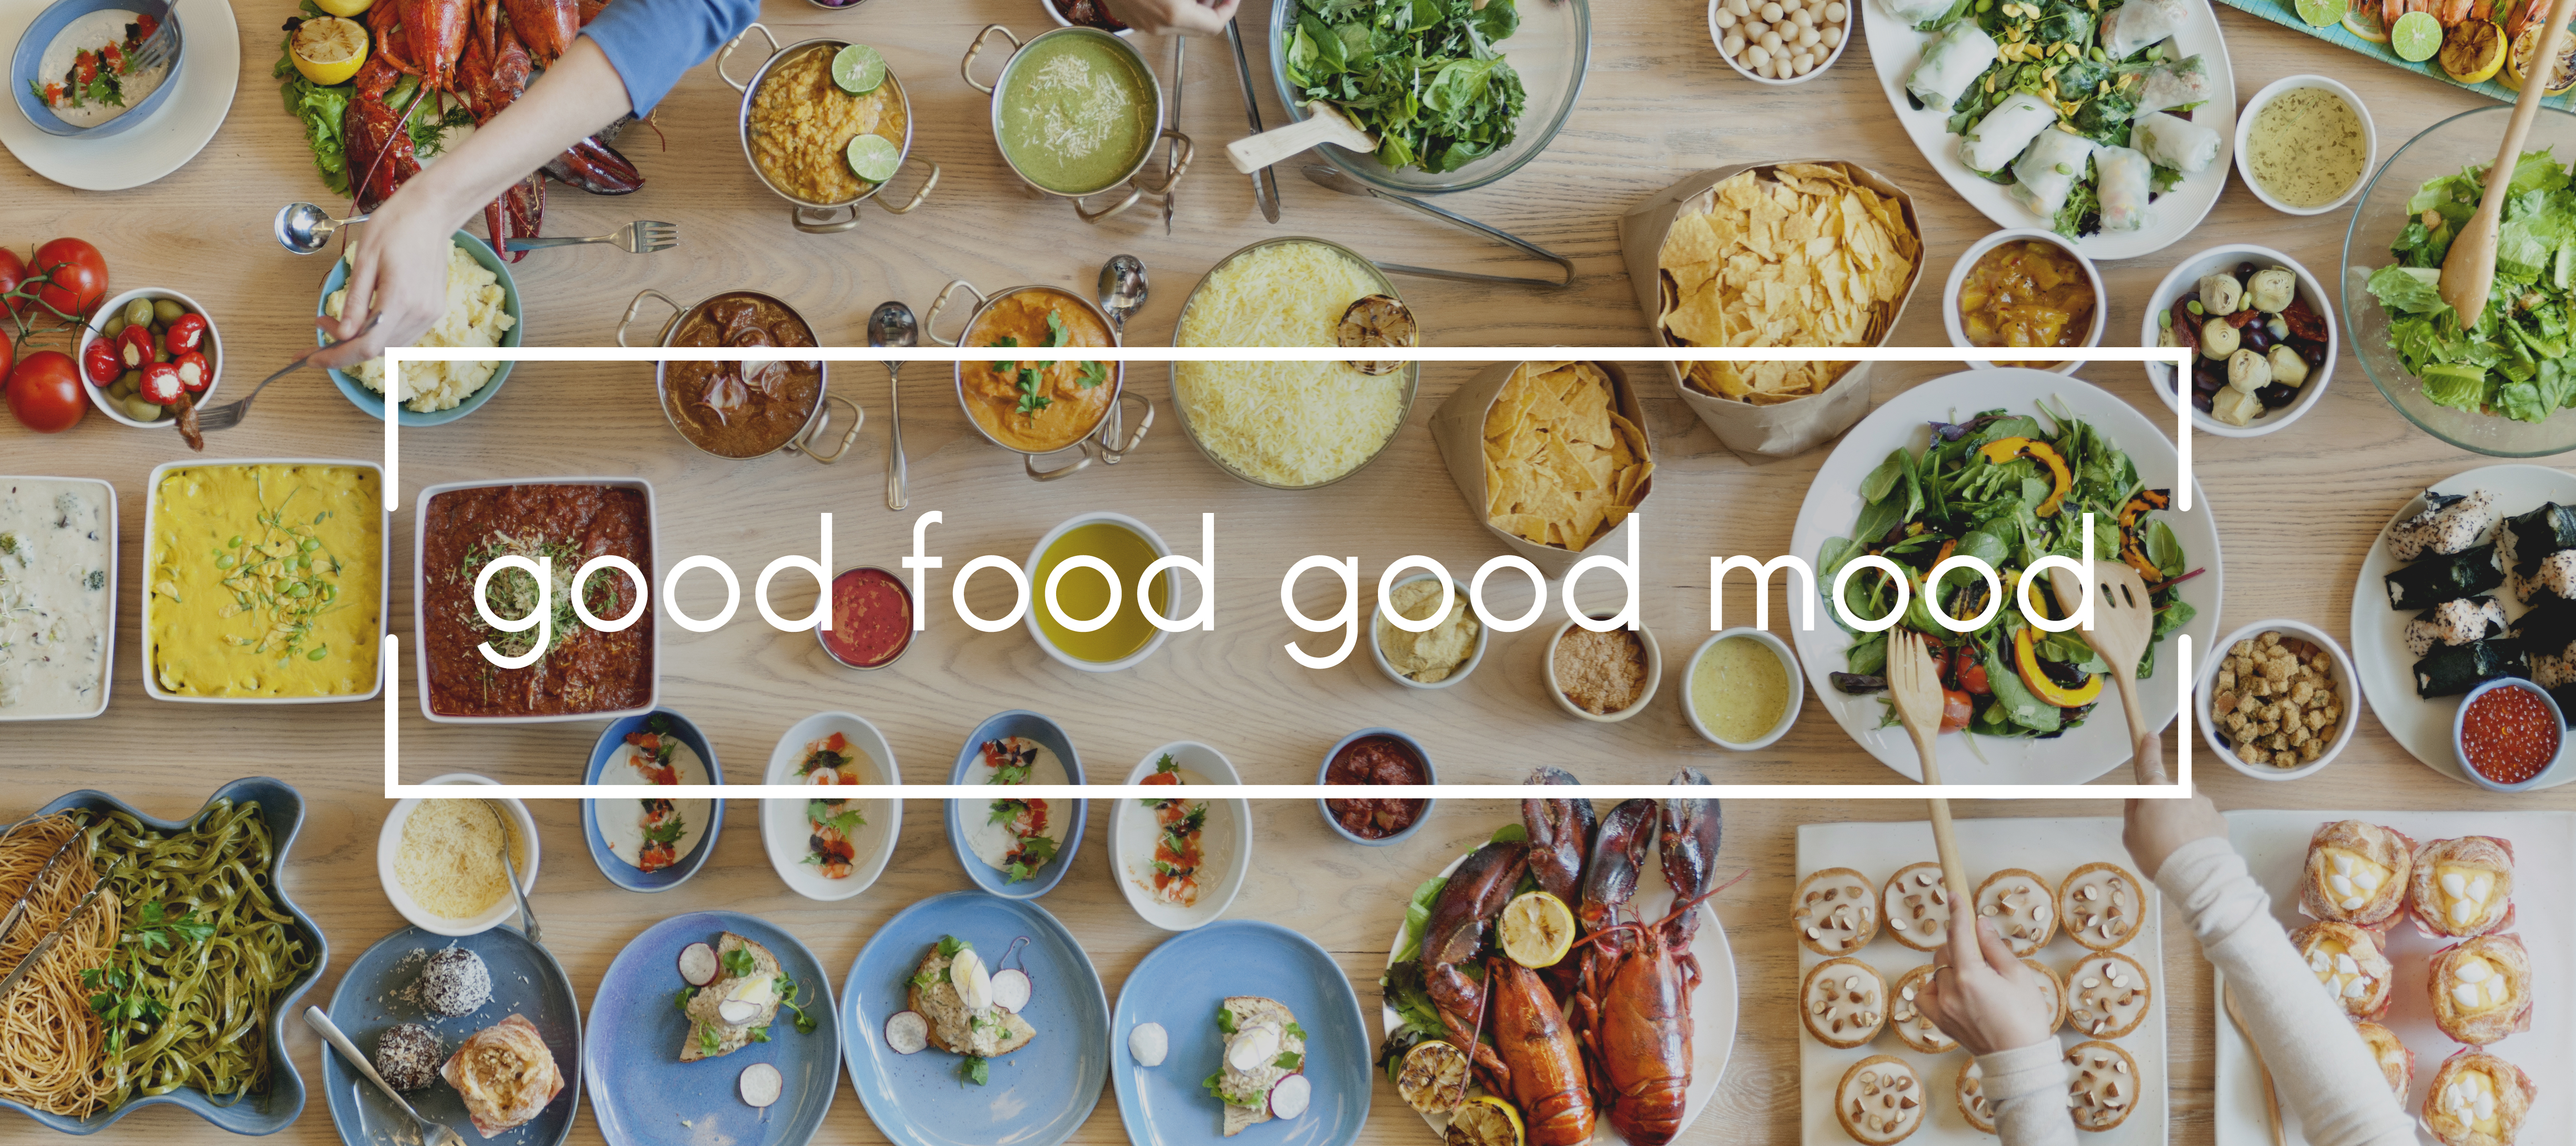 foods to improve your mood